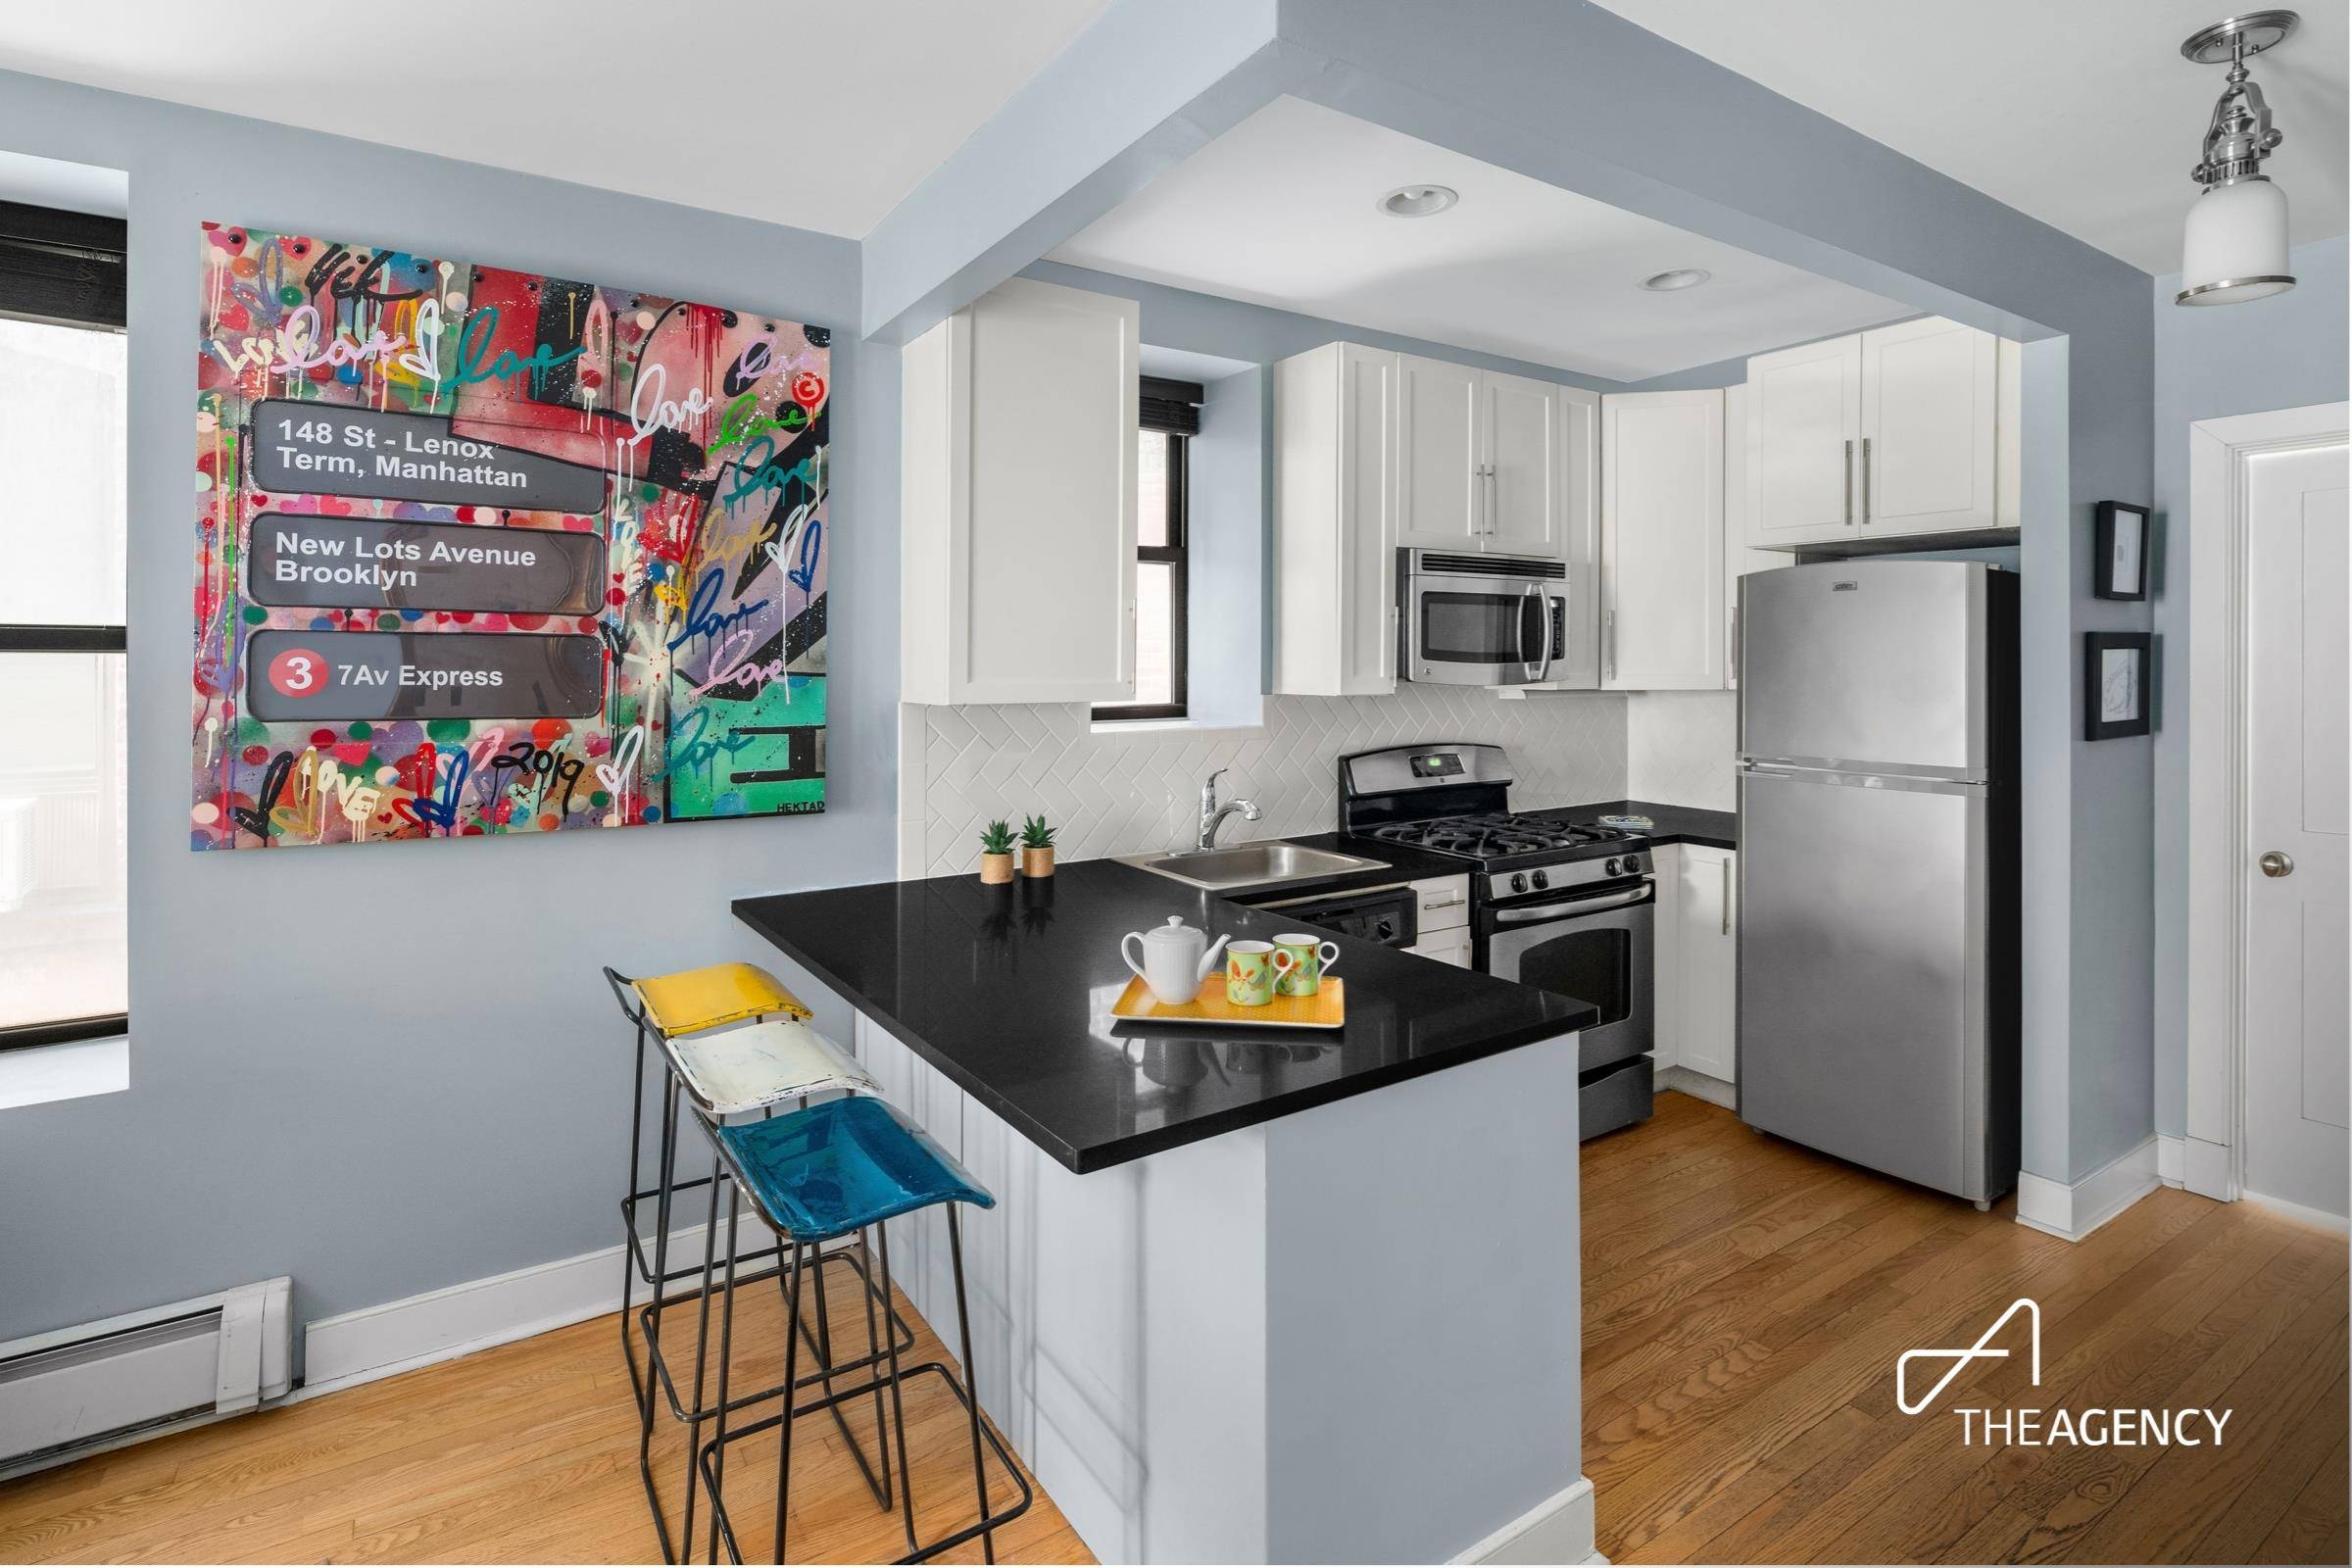 This immaculately renovated one bedroom featuring an in unit large capacity washer dryer, beautiful open kitchen with cesarstone counter tops, designer under cabinet lighting, dishwasher, gas range and stainless steel ...